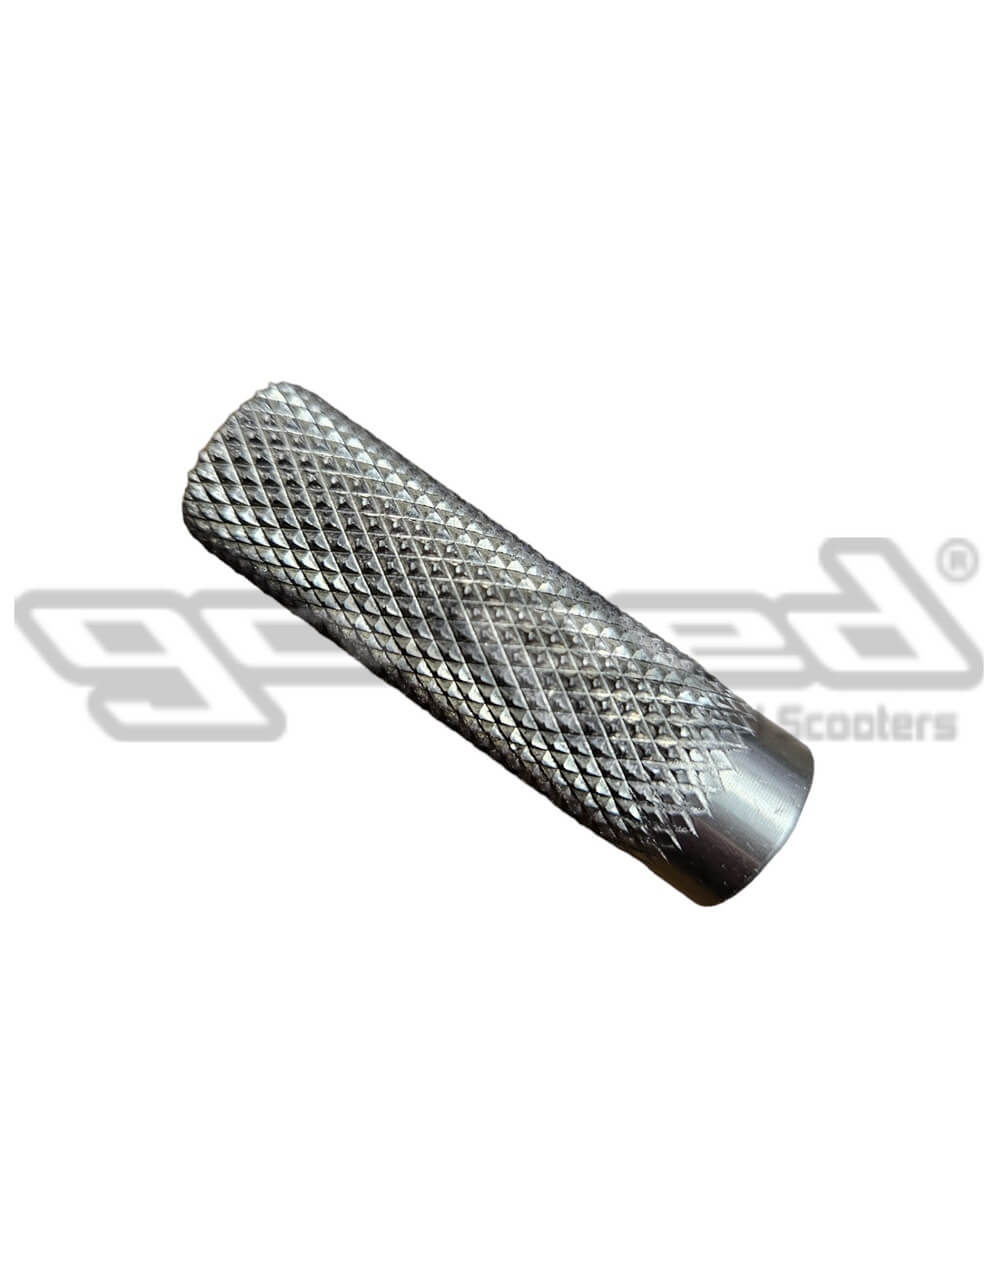 Go-Ped SPORT DRIVE SPINDLE (1013K) KNURLED for Sport Gas Scooter